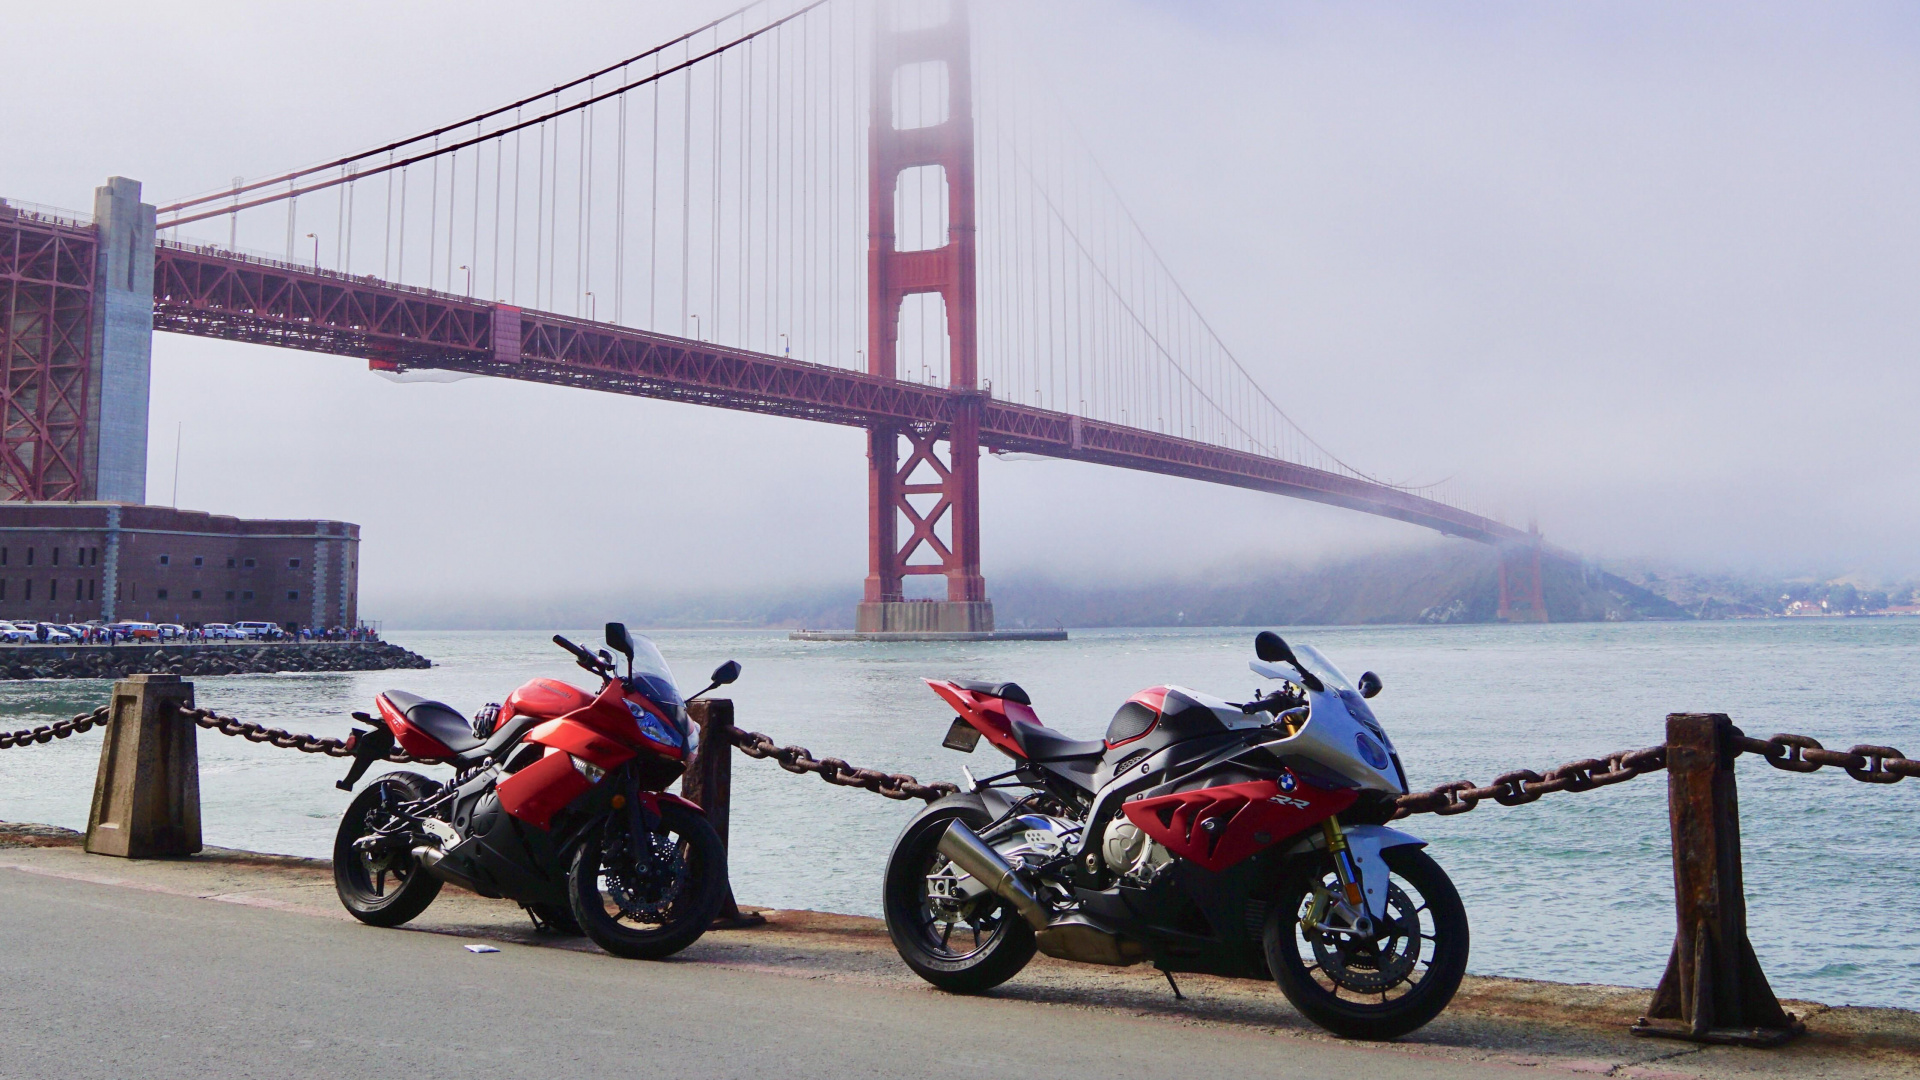 Red and Black Motorcycle Near Golden Gate Bridge. Wallpaper in 1920x1080 Resolution